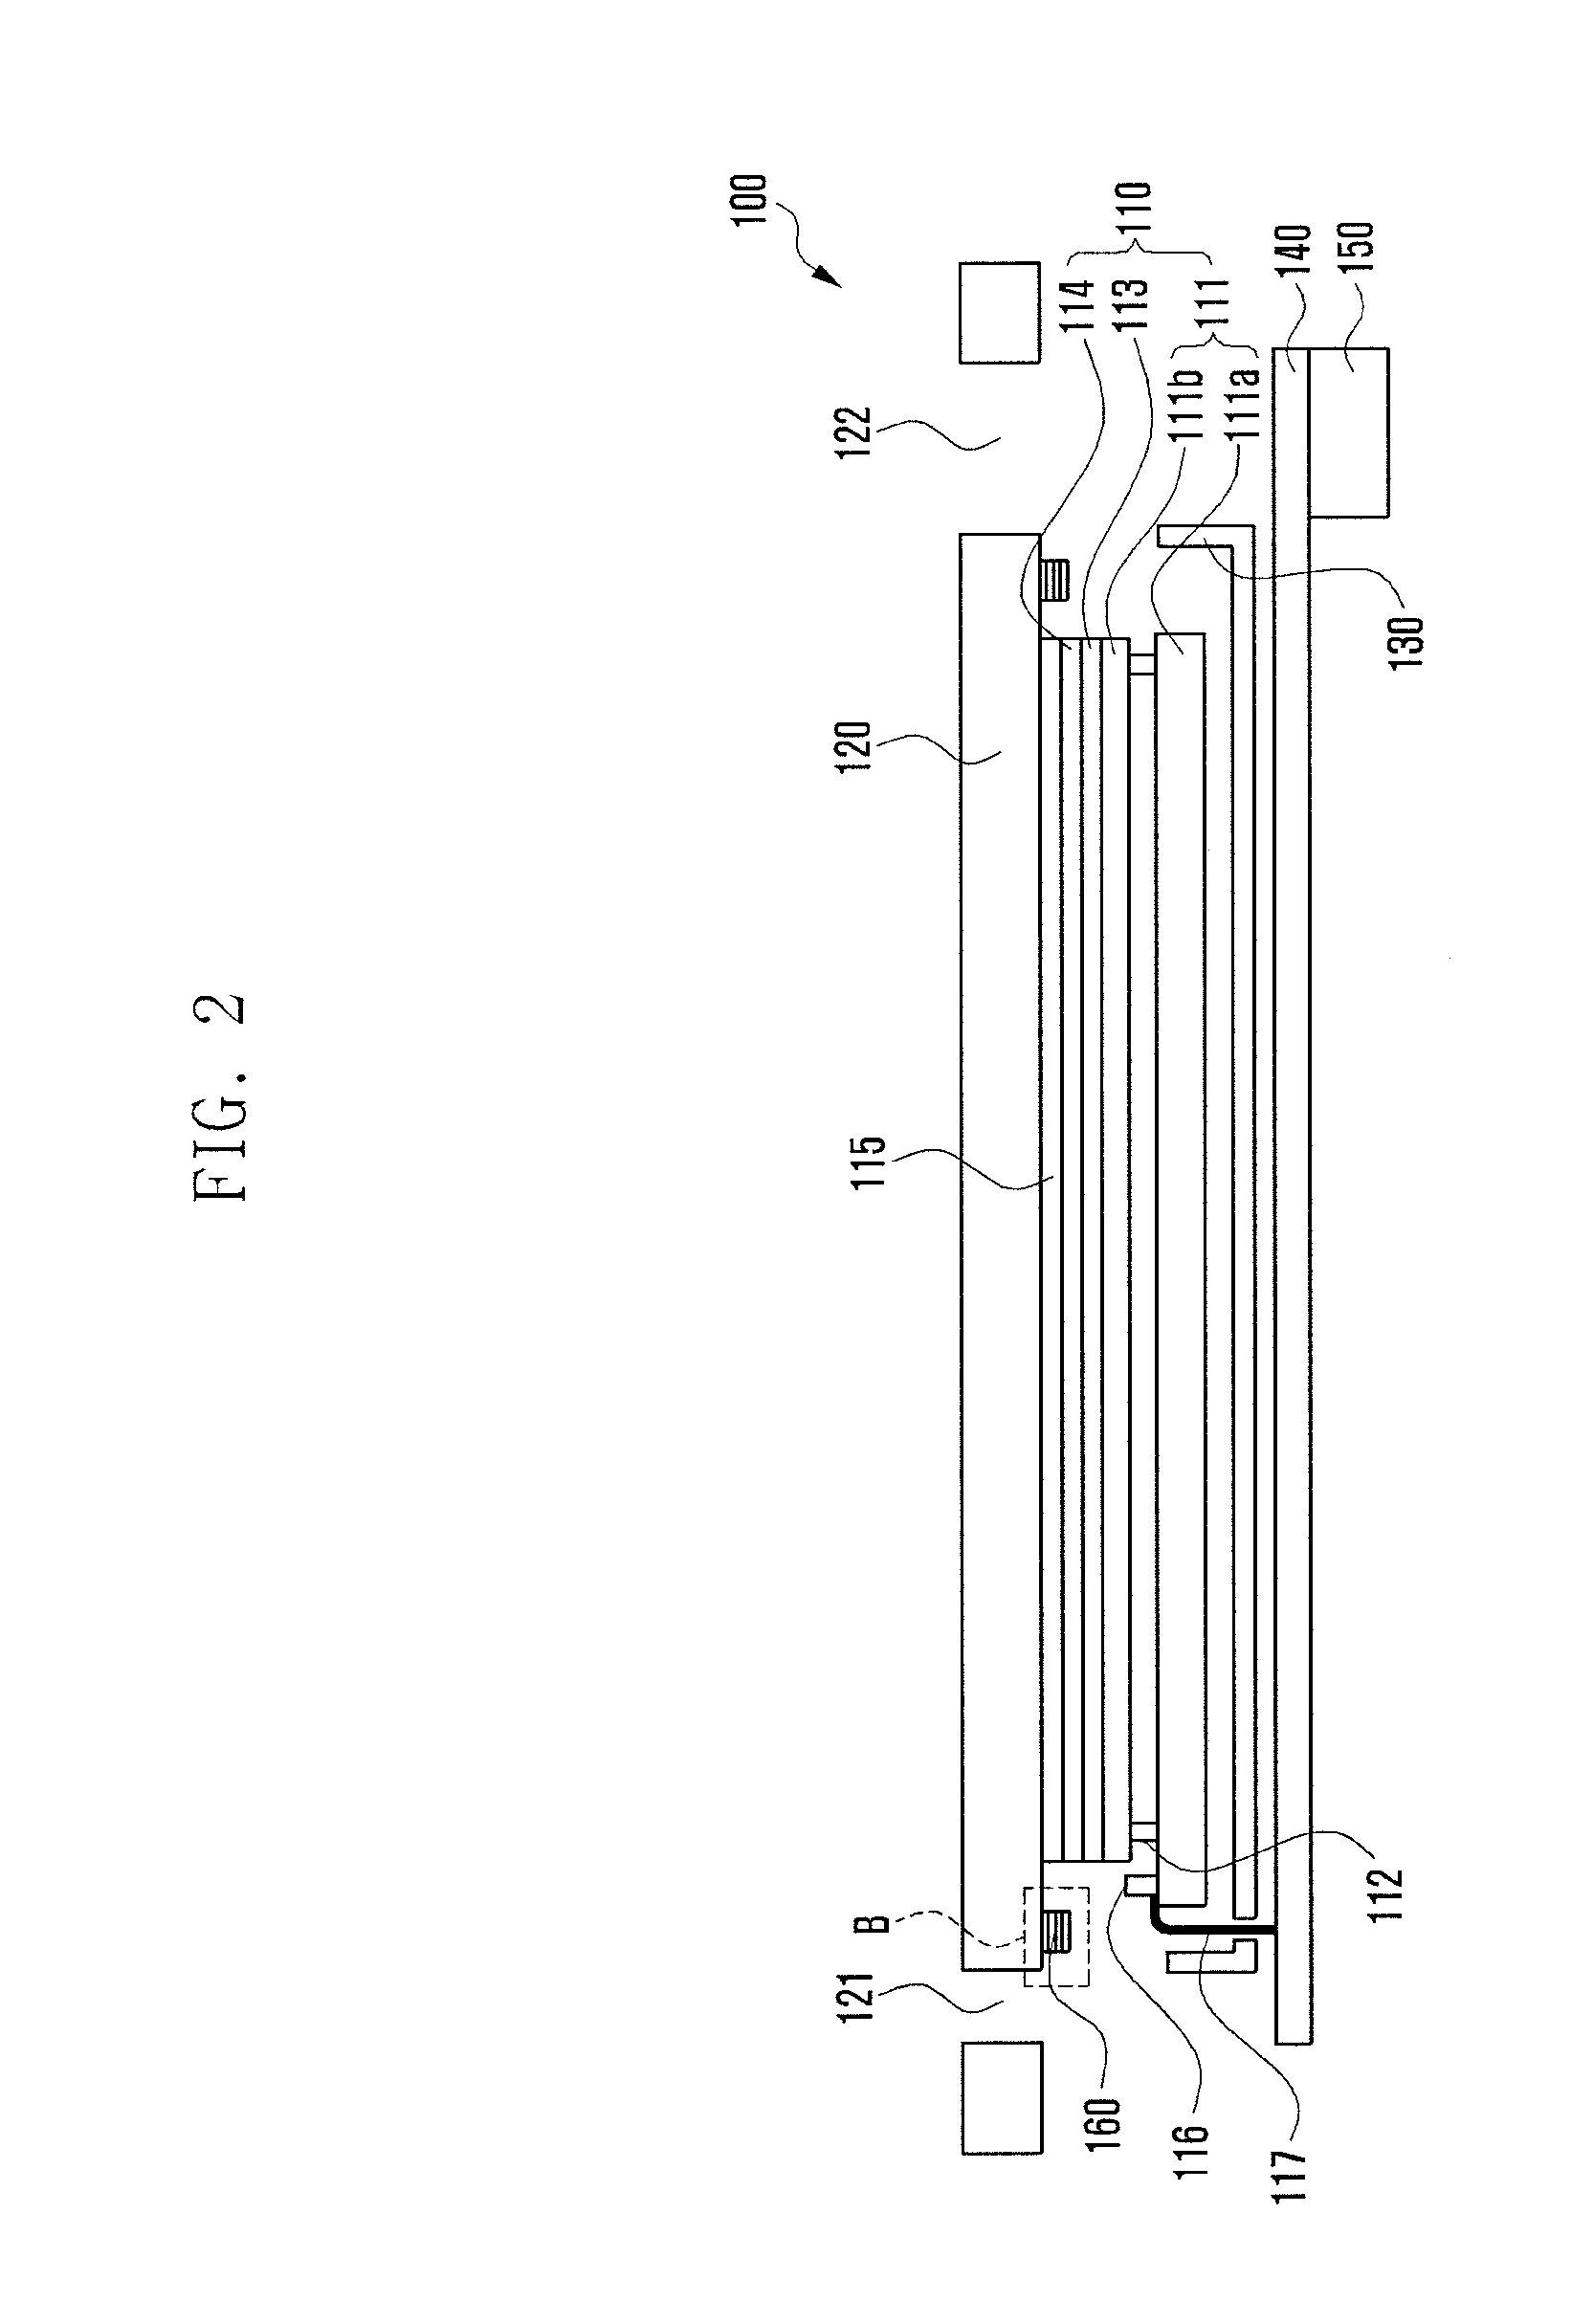 Near field communication antenna device of mobile terminal